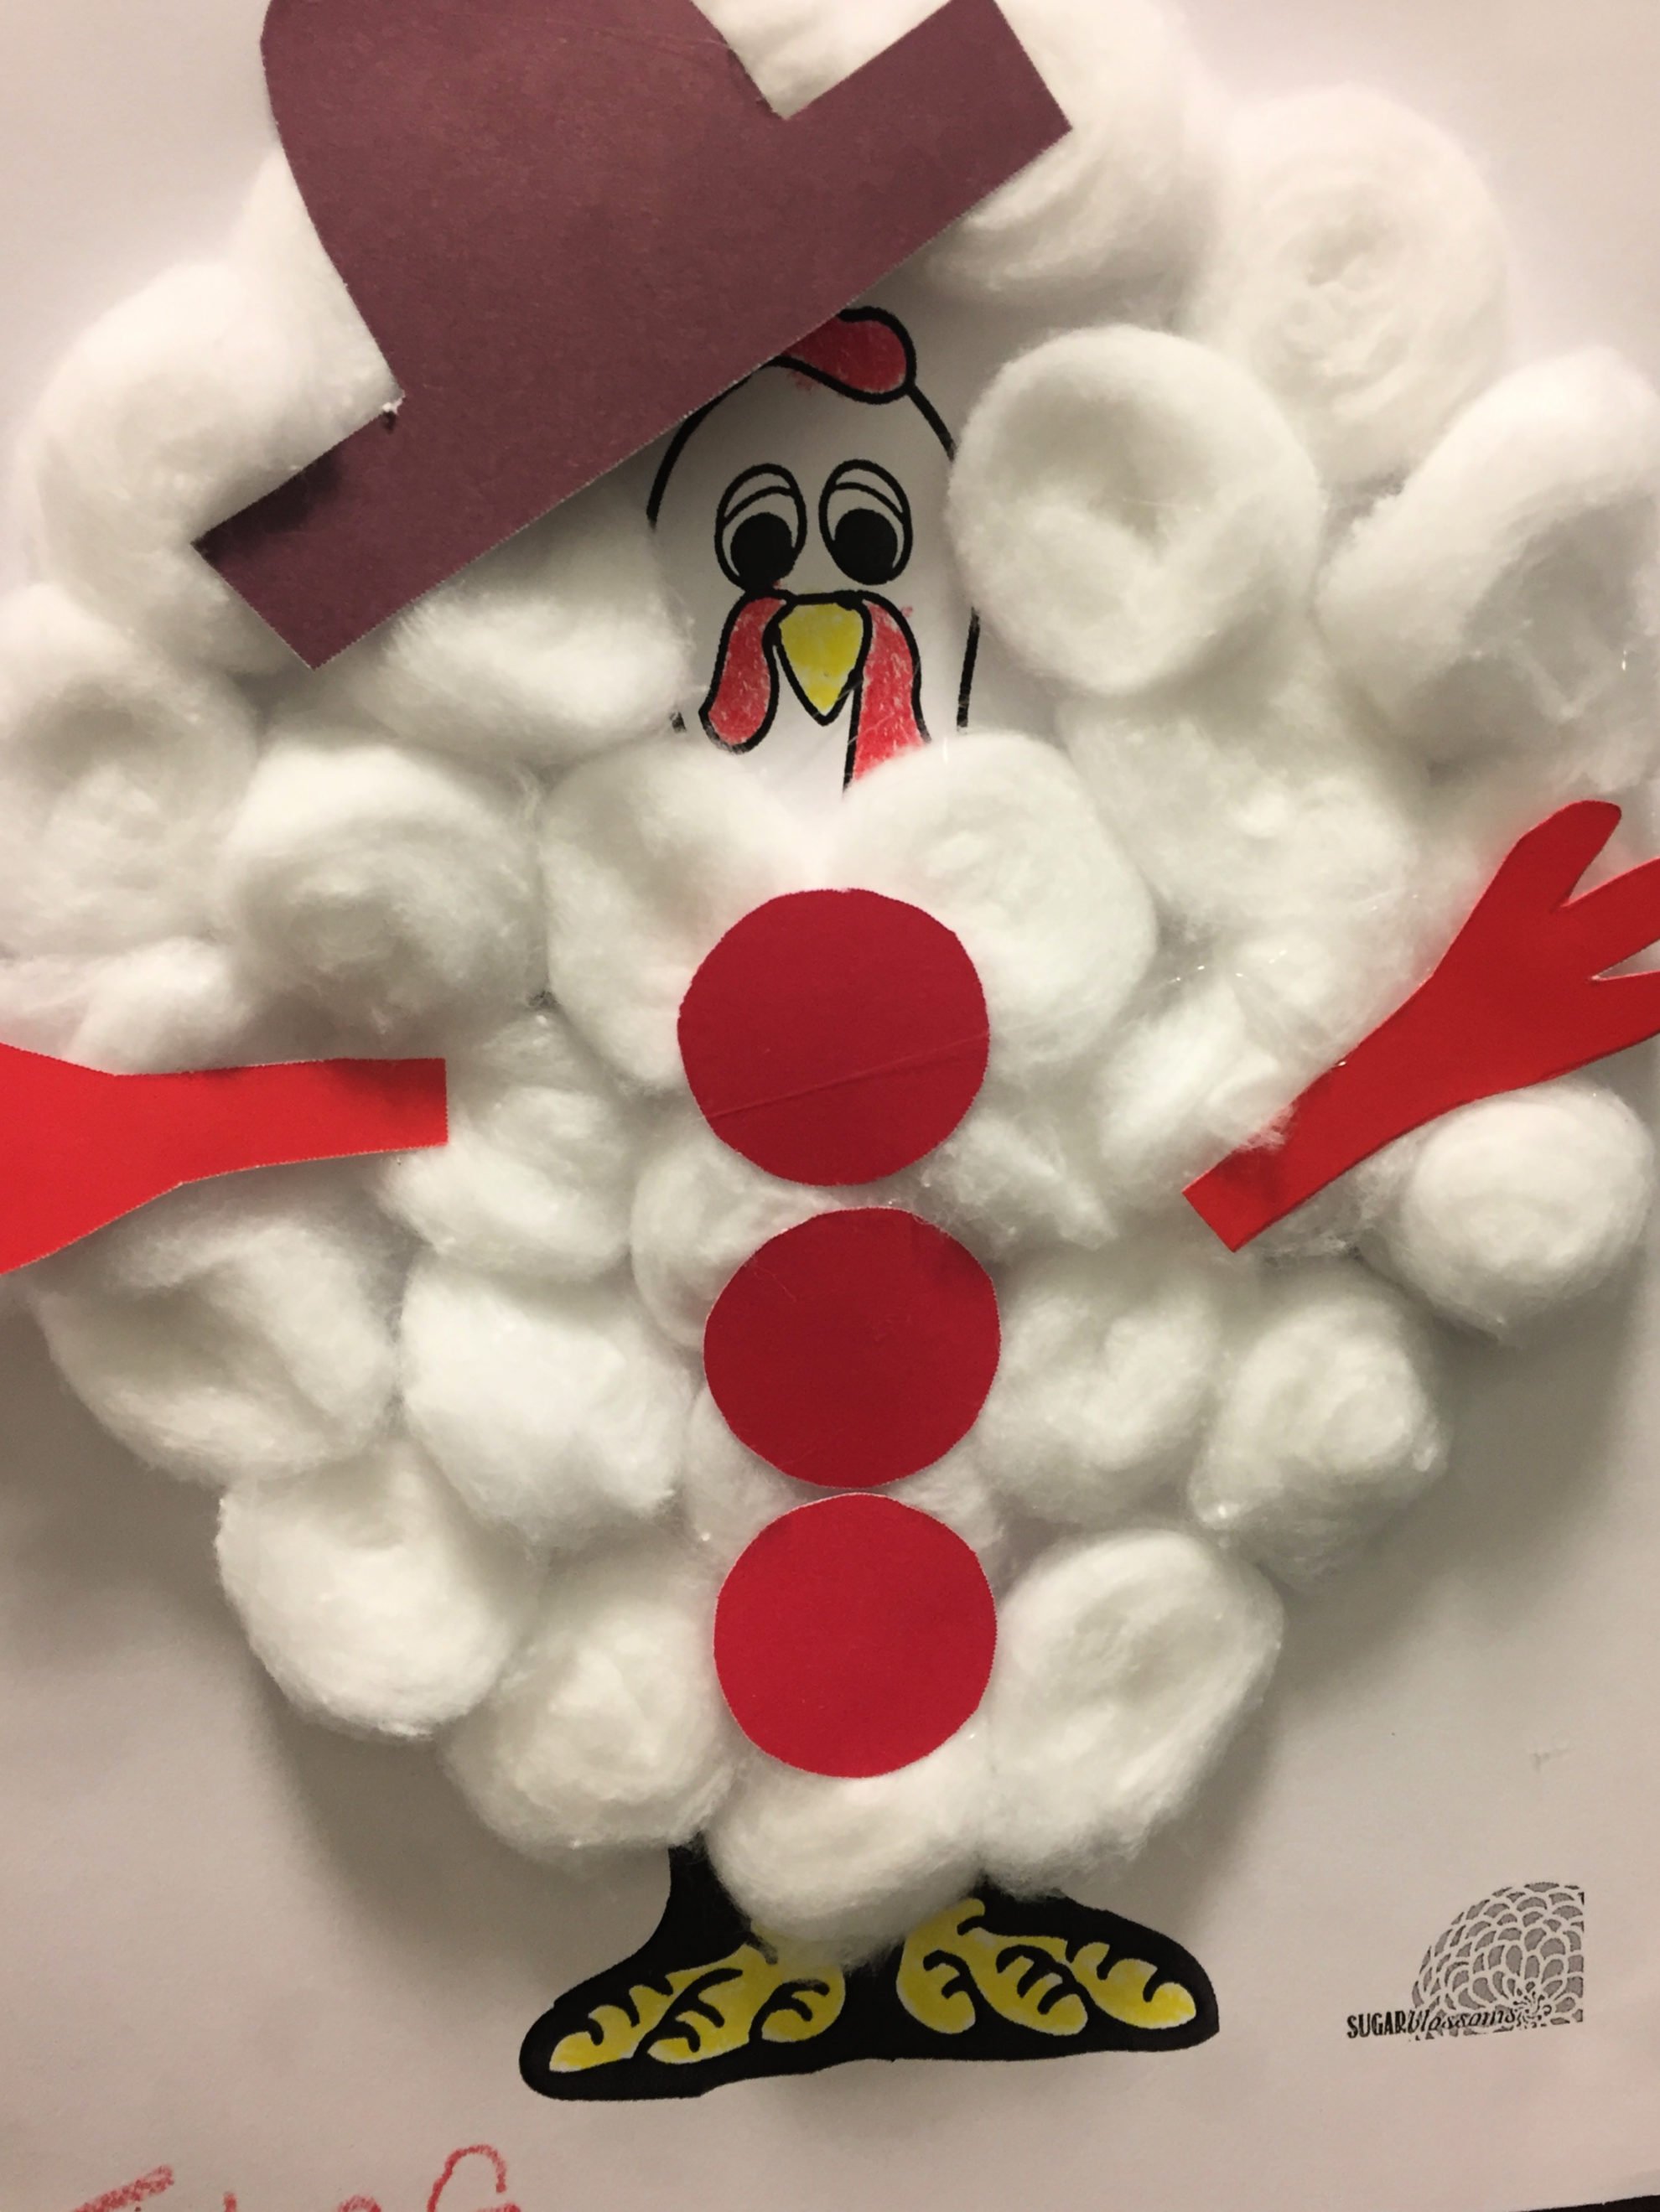 Turkey In Disguise as a Snowman filled with white cotton balls, red card stock for buttons and hands. 